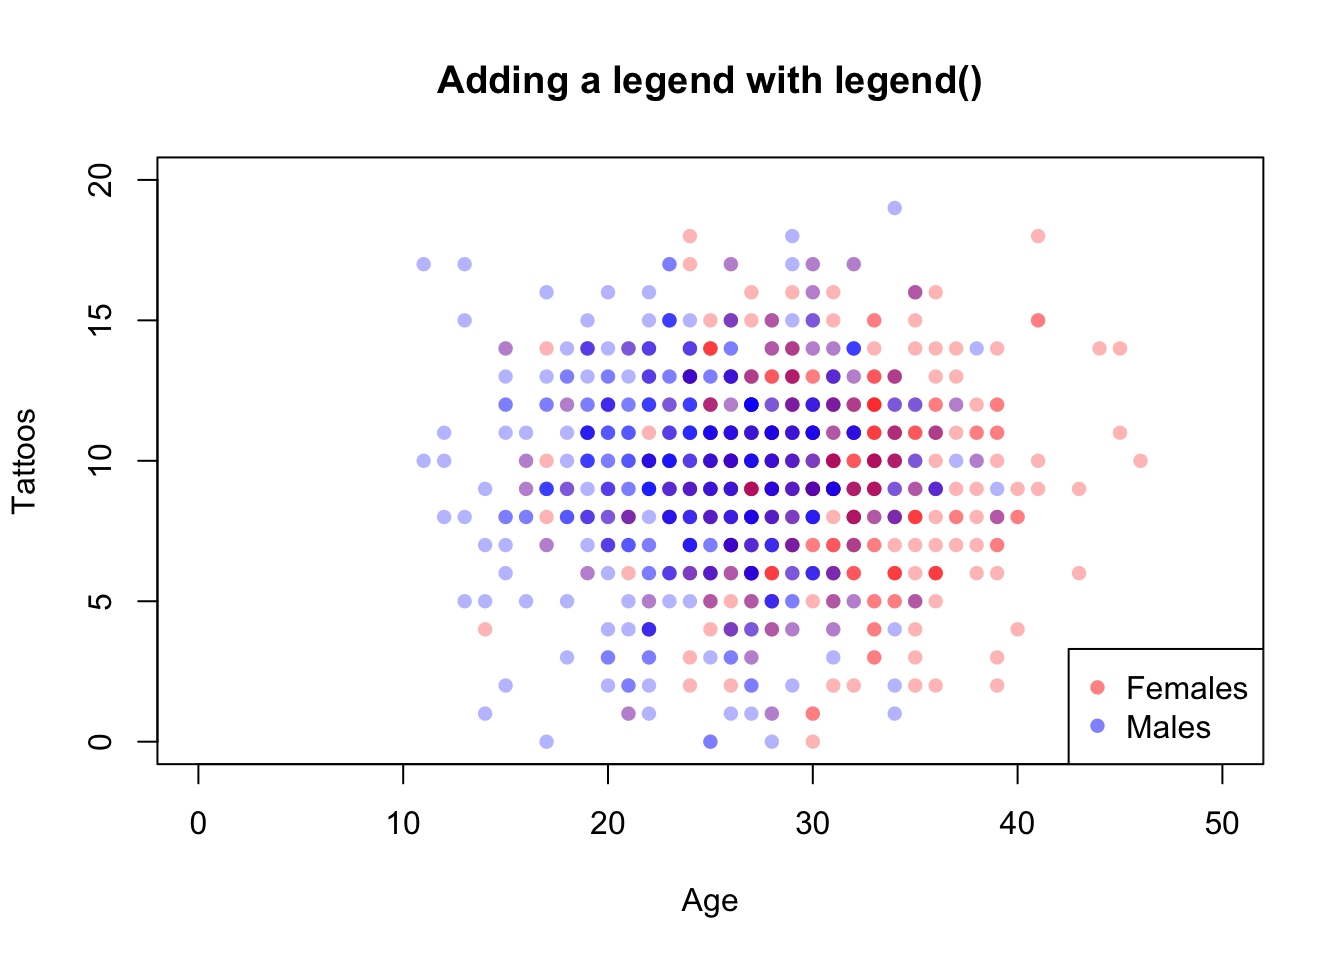 Adding a legend to a plot with legend().